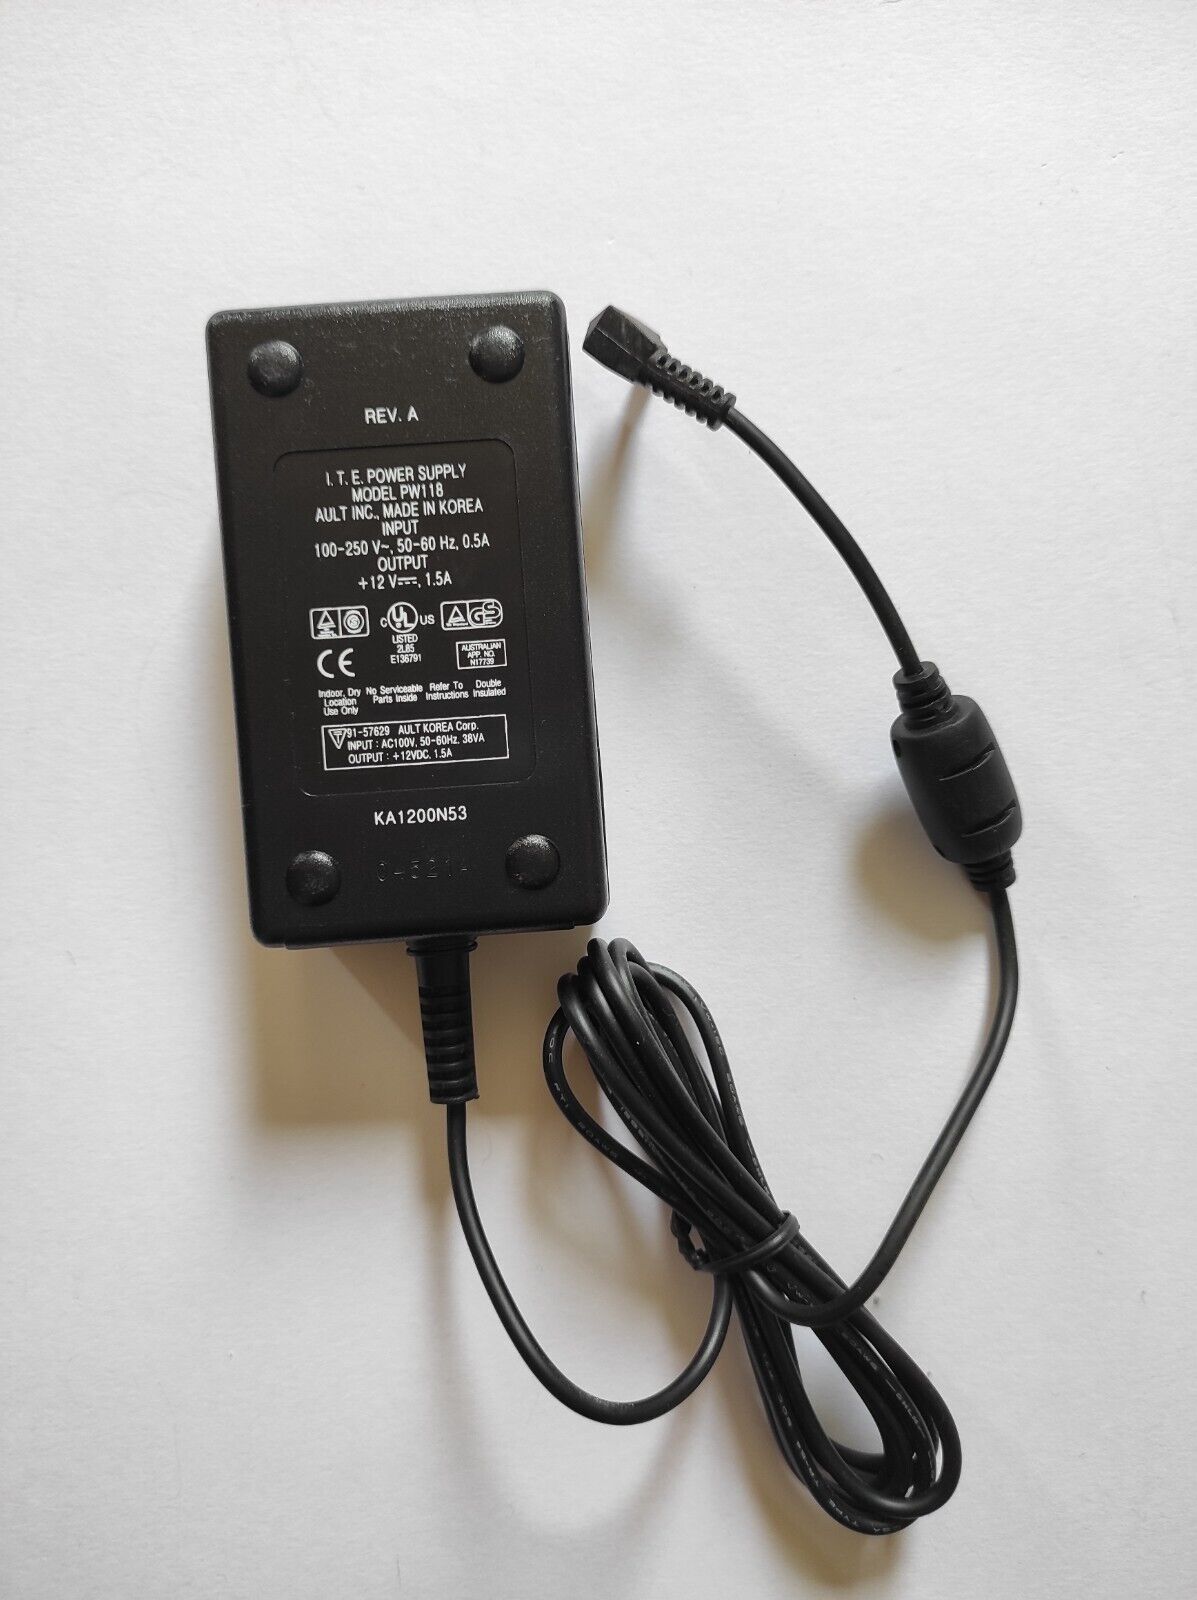 *Brand NEW*Wide Range 12V 1.5A AC-DC Adapter Ault Korea Corporation R POWER Supply